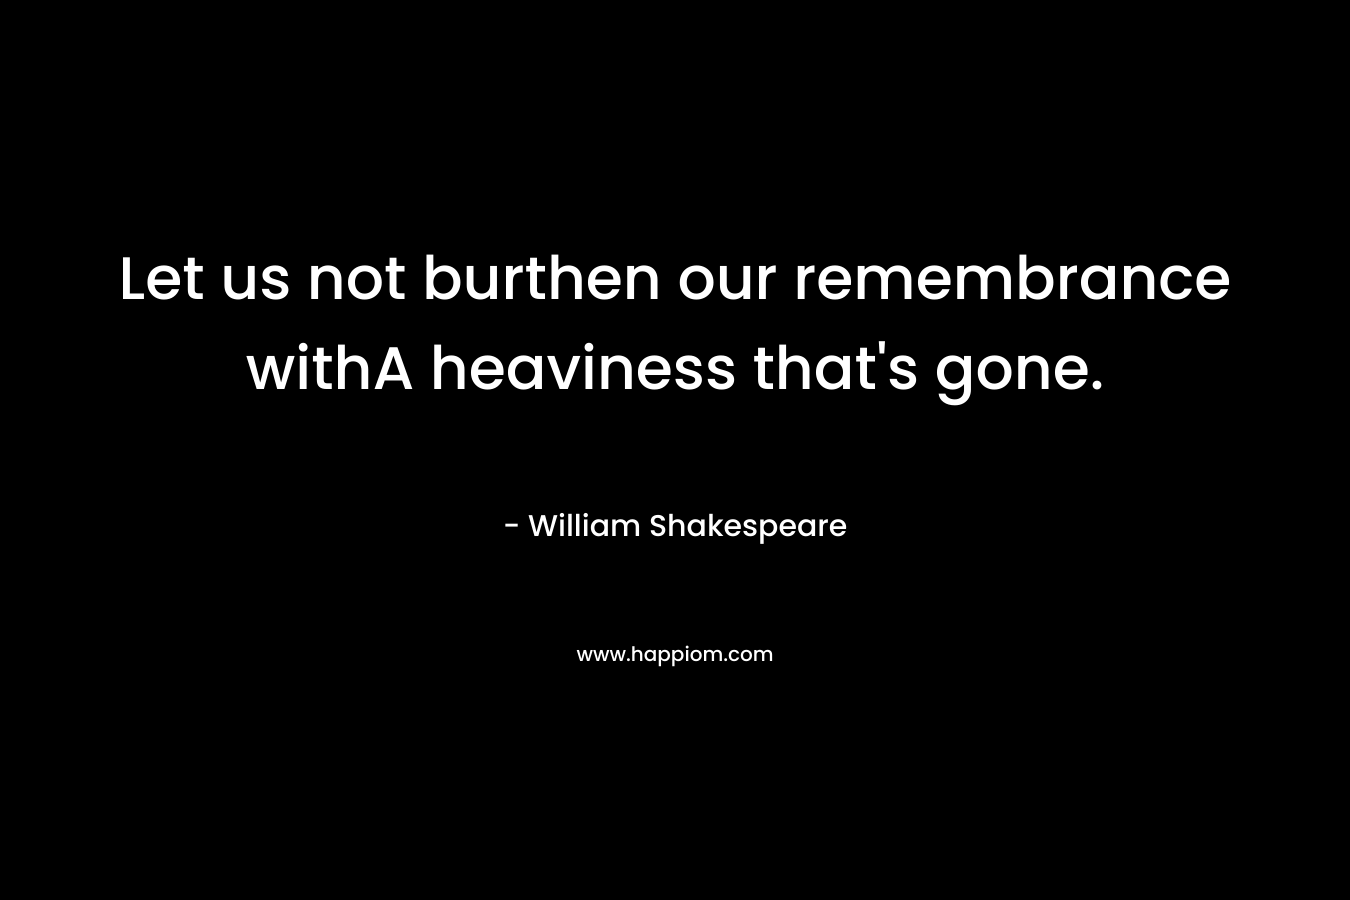 Let us not burthen our remembrance withA heaviness that’s gone. – William Shakespeare